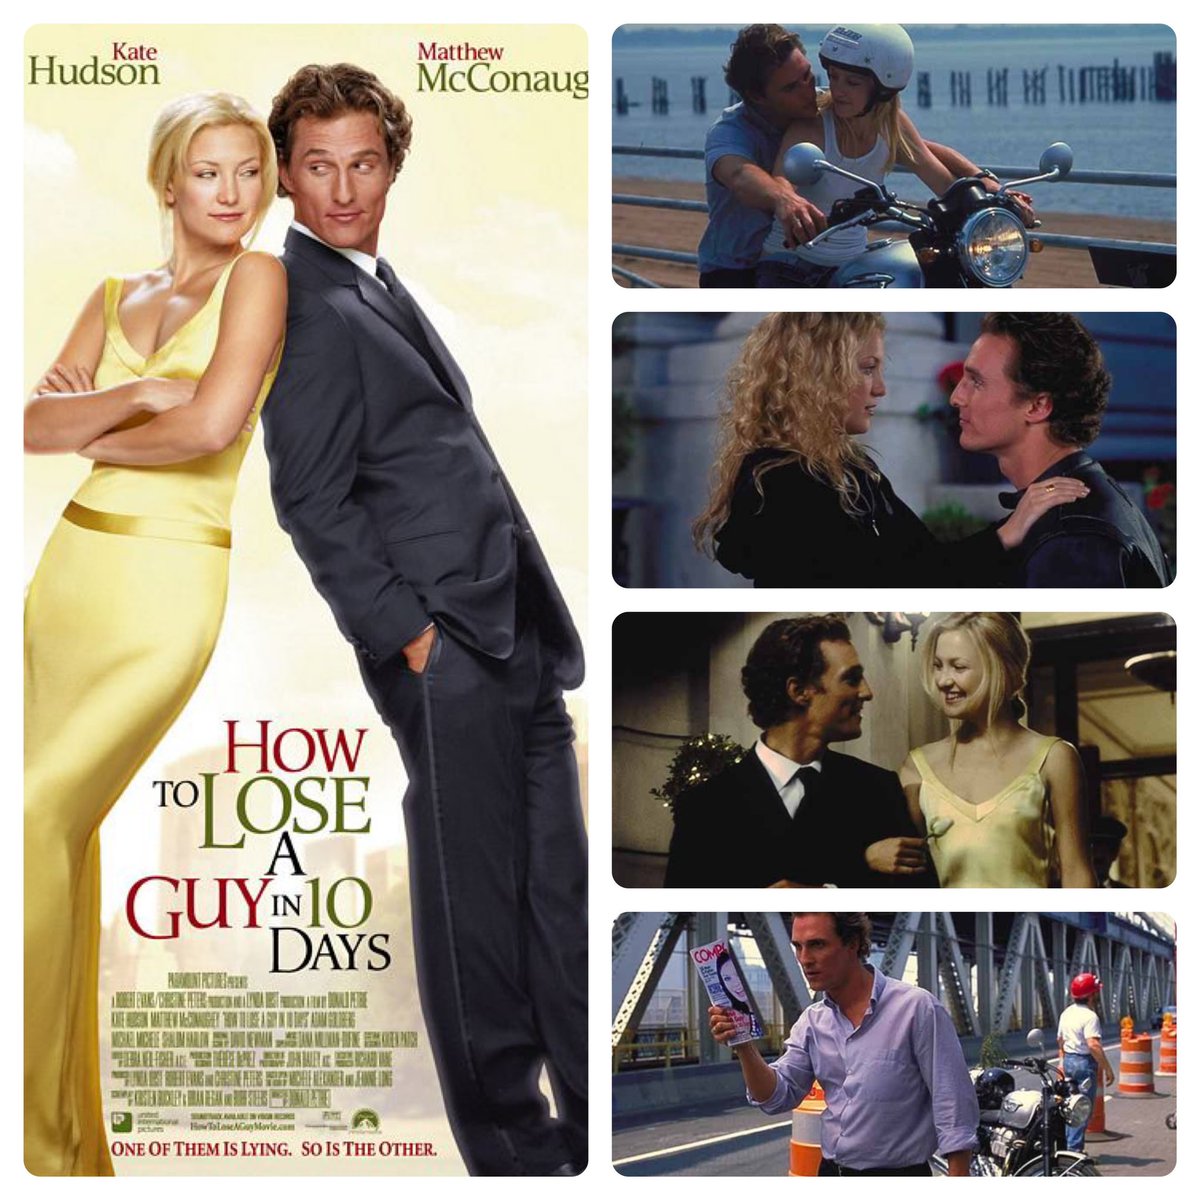 How to Lose a Guy in 10 Days celebrates 21st anniversary today.
#howtoloseaguyin10days #howtoloseaguyintendays #katehudson #katehudsonfans #matthewmcconaughey #classicmovie #classicfilm #filmclassic #movieclassics #2000smovies #2000sfilm #paramount #paramountpictures